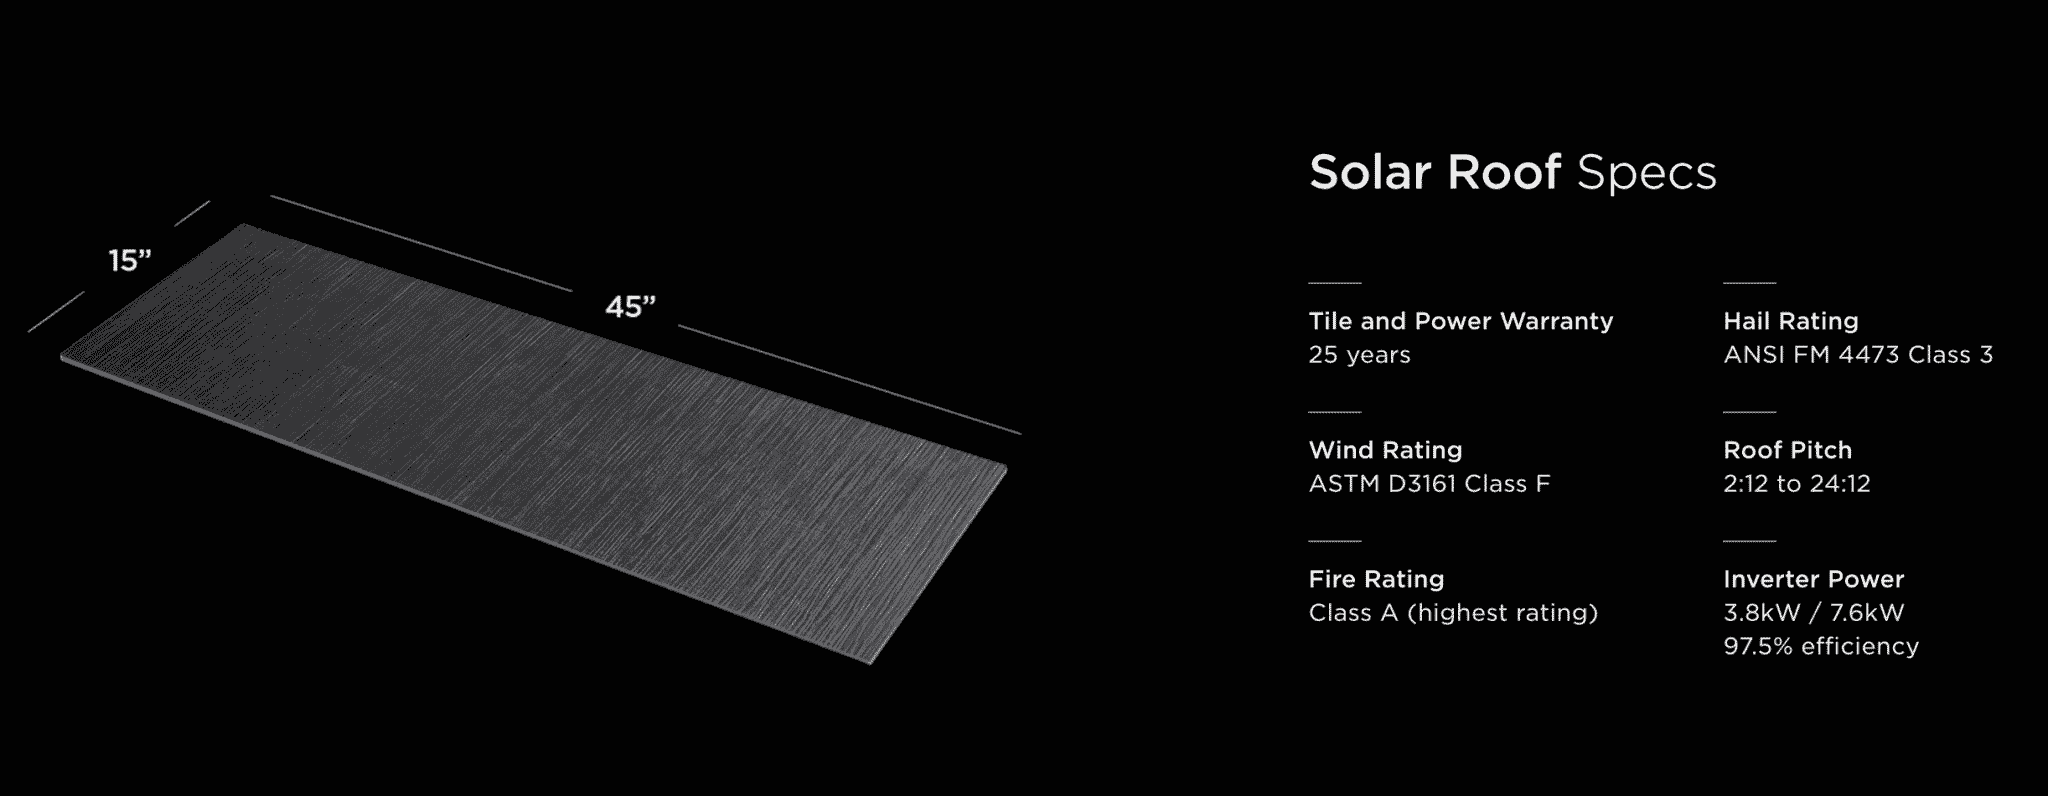 Tesla Solar Roof Specs and review